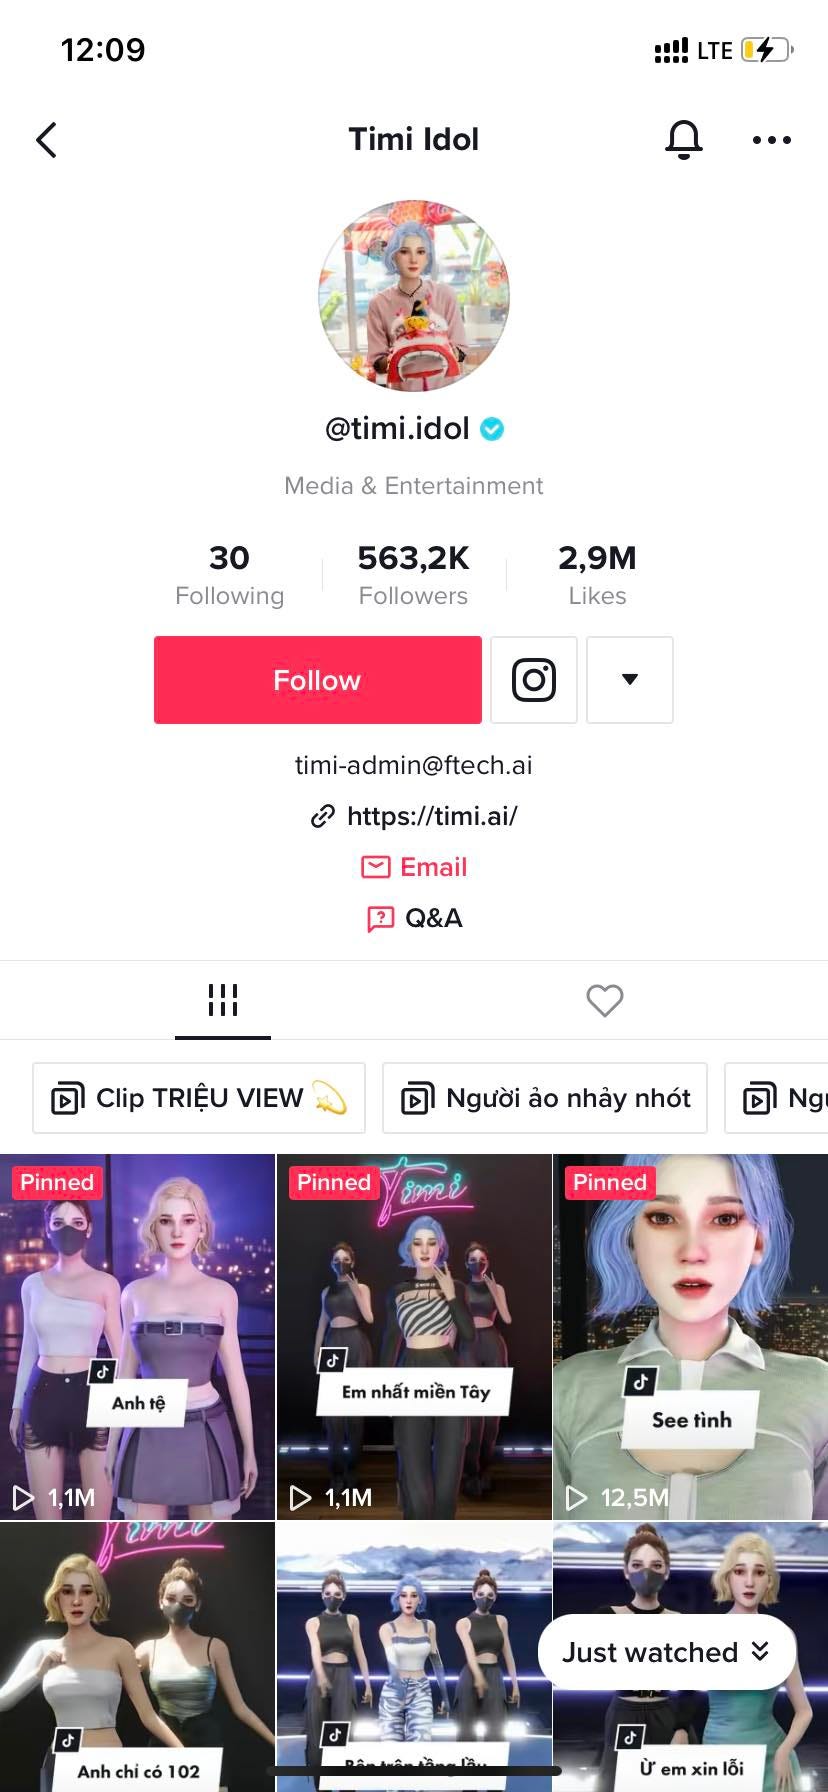 May be an image of 10 people and text that says '12:09 < LTE Timi Idol @timi.idol Media Entertainment 30 Following 563,2K Followers 2,9M Likes Follow timi-admin@ftech.ai à https://timi.ai/ Email Q&A Clip TRIỆU VIEW Pinned Người ảo nhảy nhót Pinned Ng Pinned Anhtệ Em nhất miền Tây ▷ 1,1M See tình 1,1M 12,5M よ Just watched 02 J'emxinlỗ'